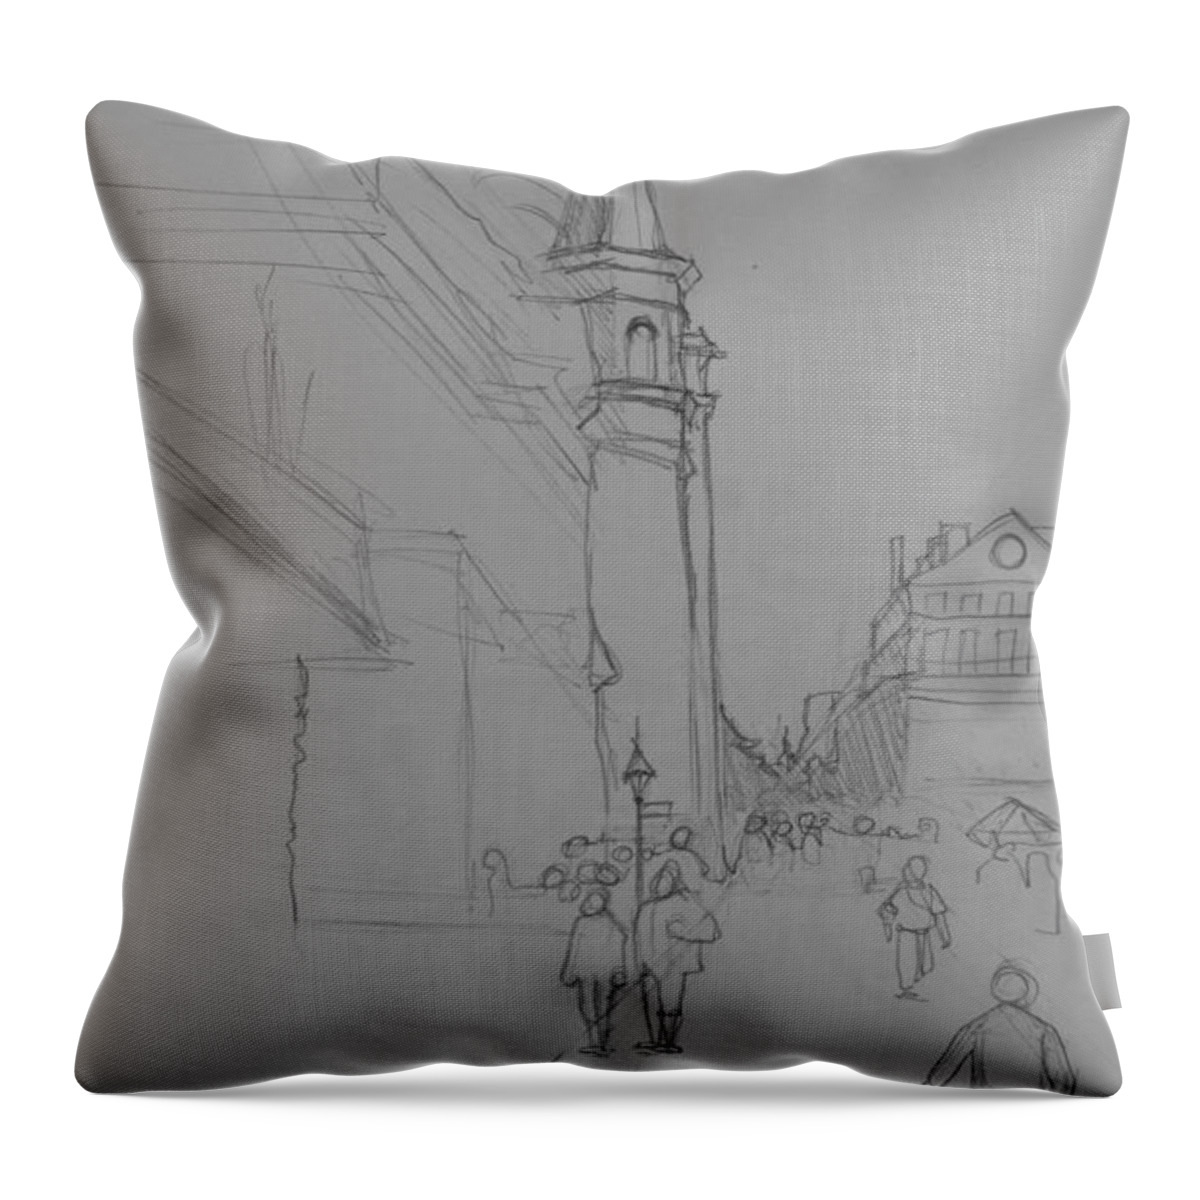 New Orleans Throw Pillow featuring the drawing Jackson Square New Orleans by Jani Freimann